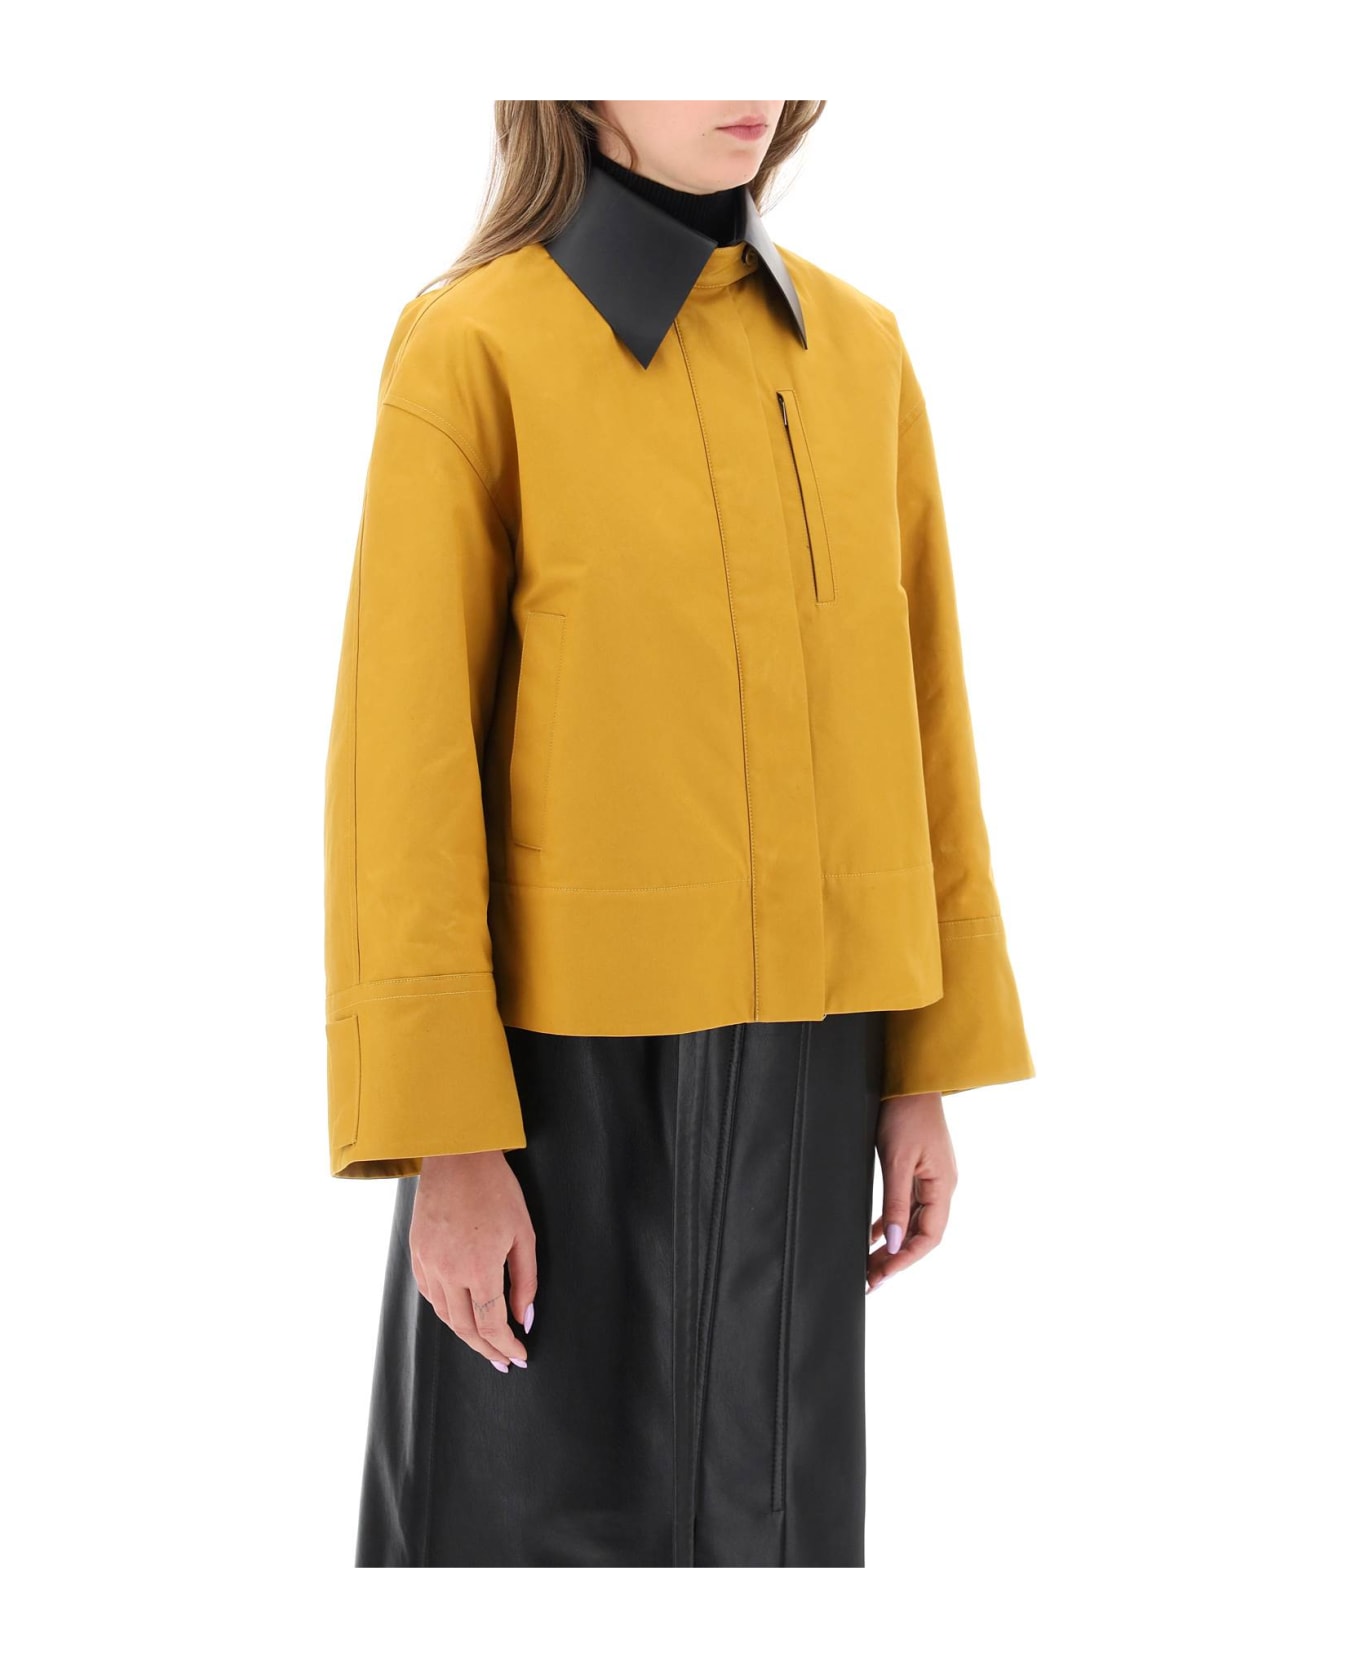 Jil Sander Jacket With Leather Collar - MUSTARD (Yellow)